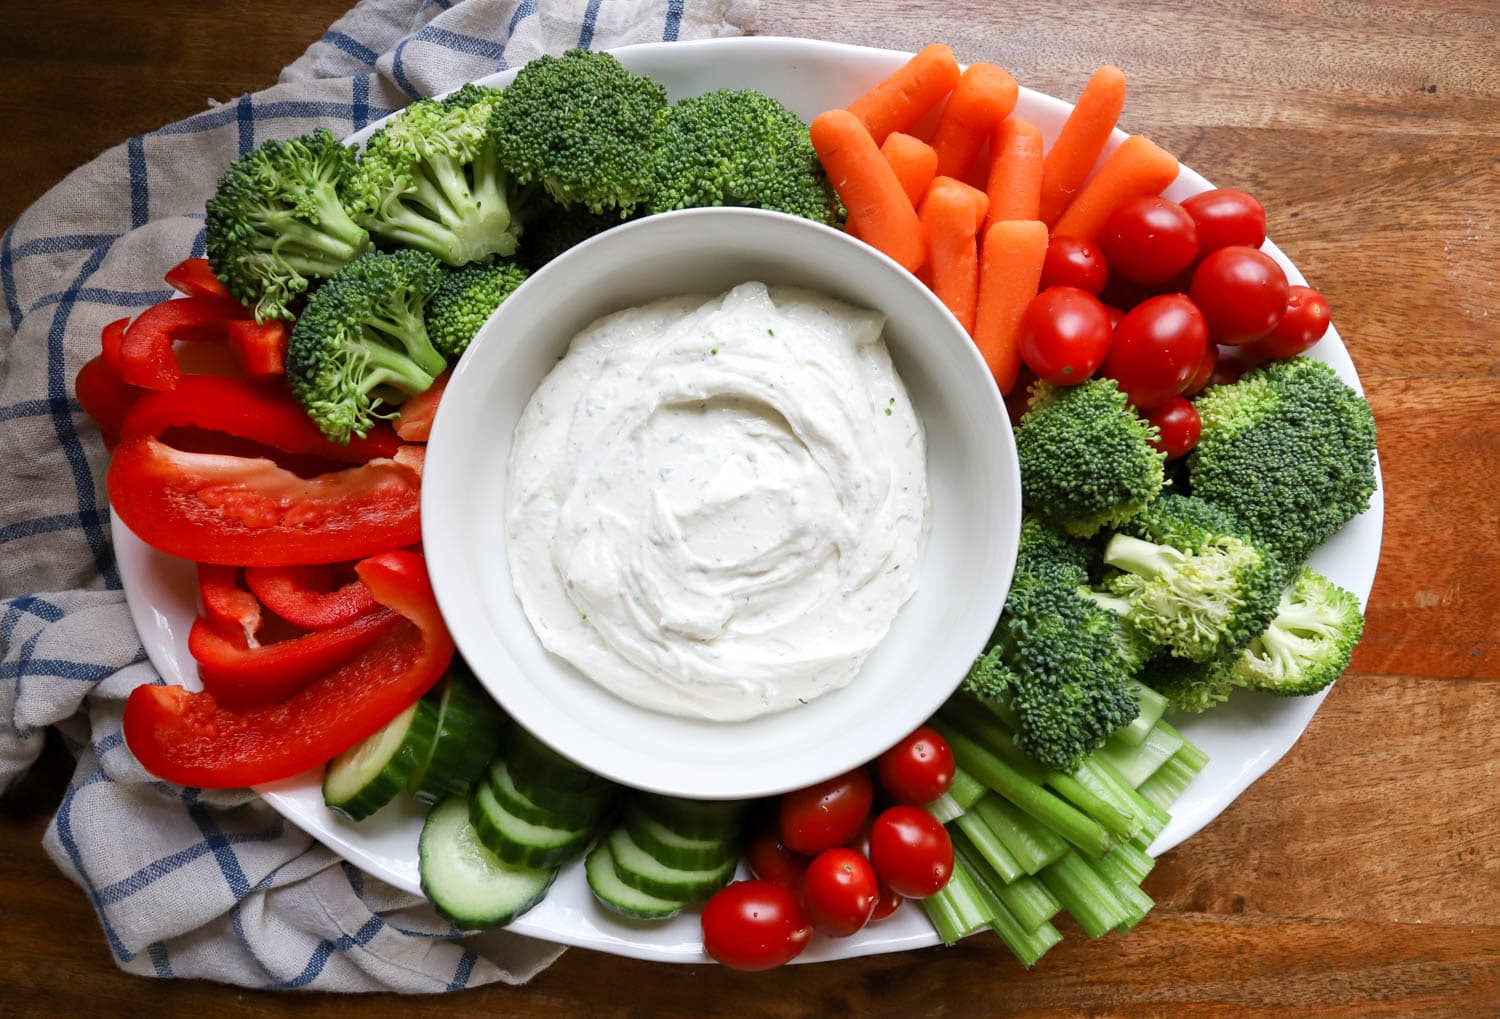 Platter of veggies and ranch dip for dipping.